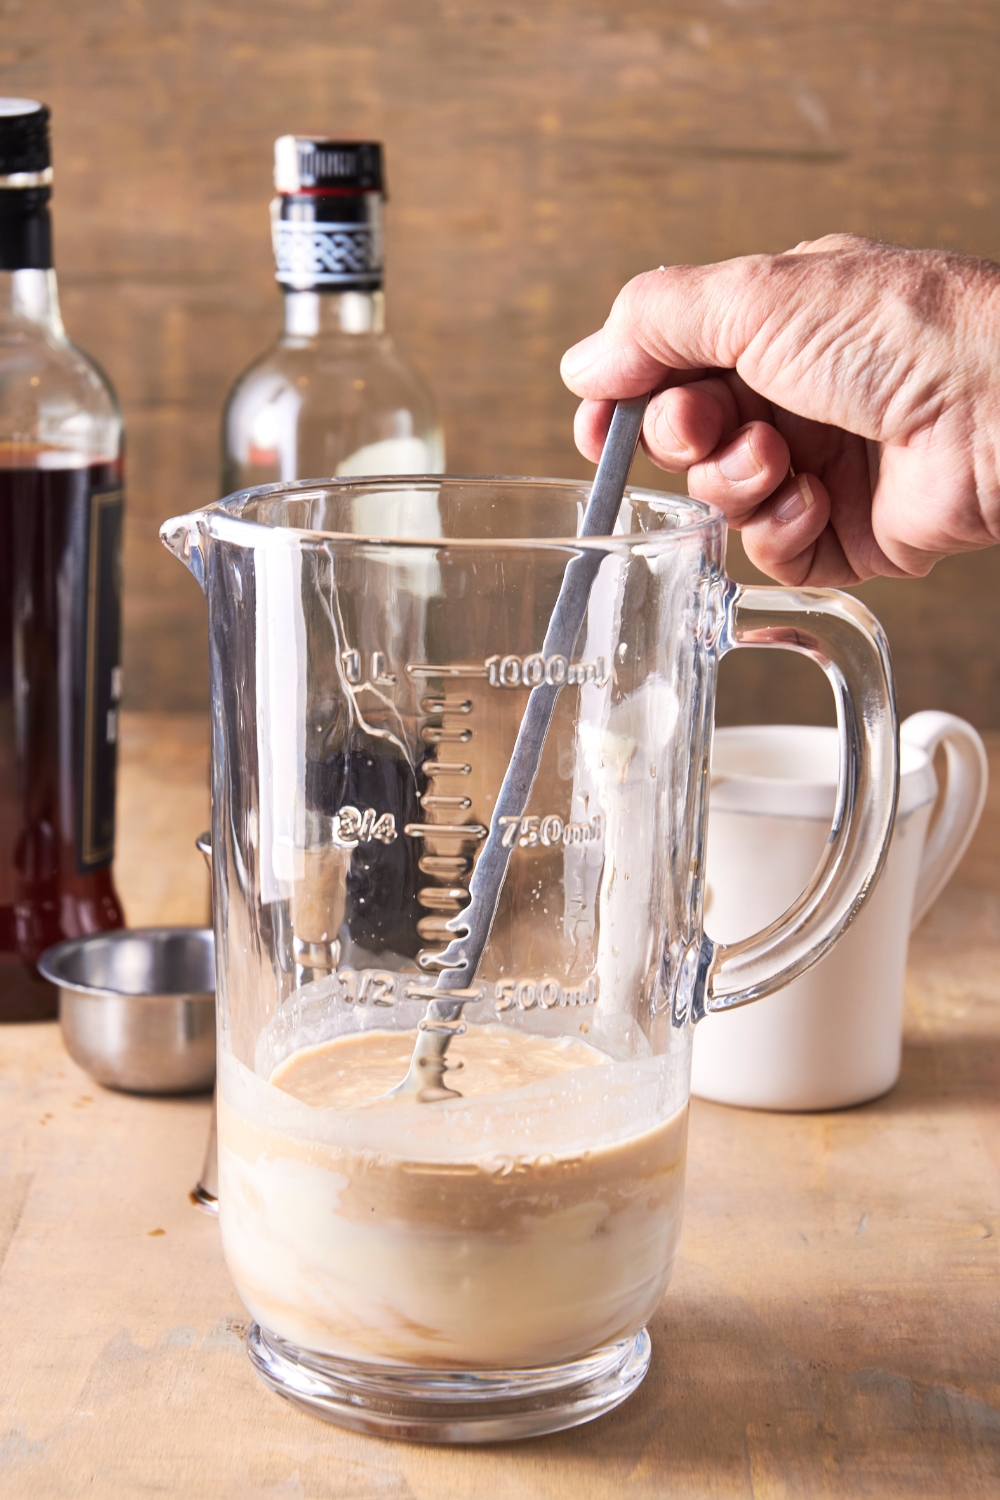 A pitcher with bourbon cream being mixed.